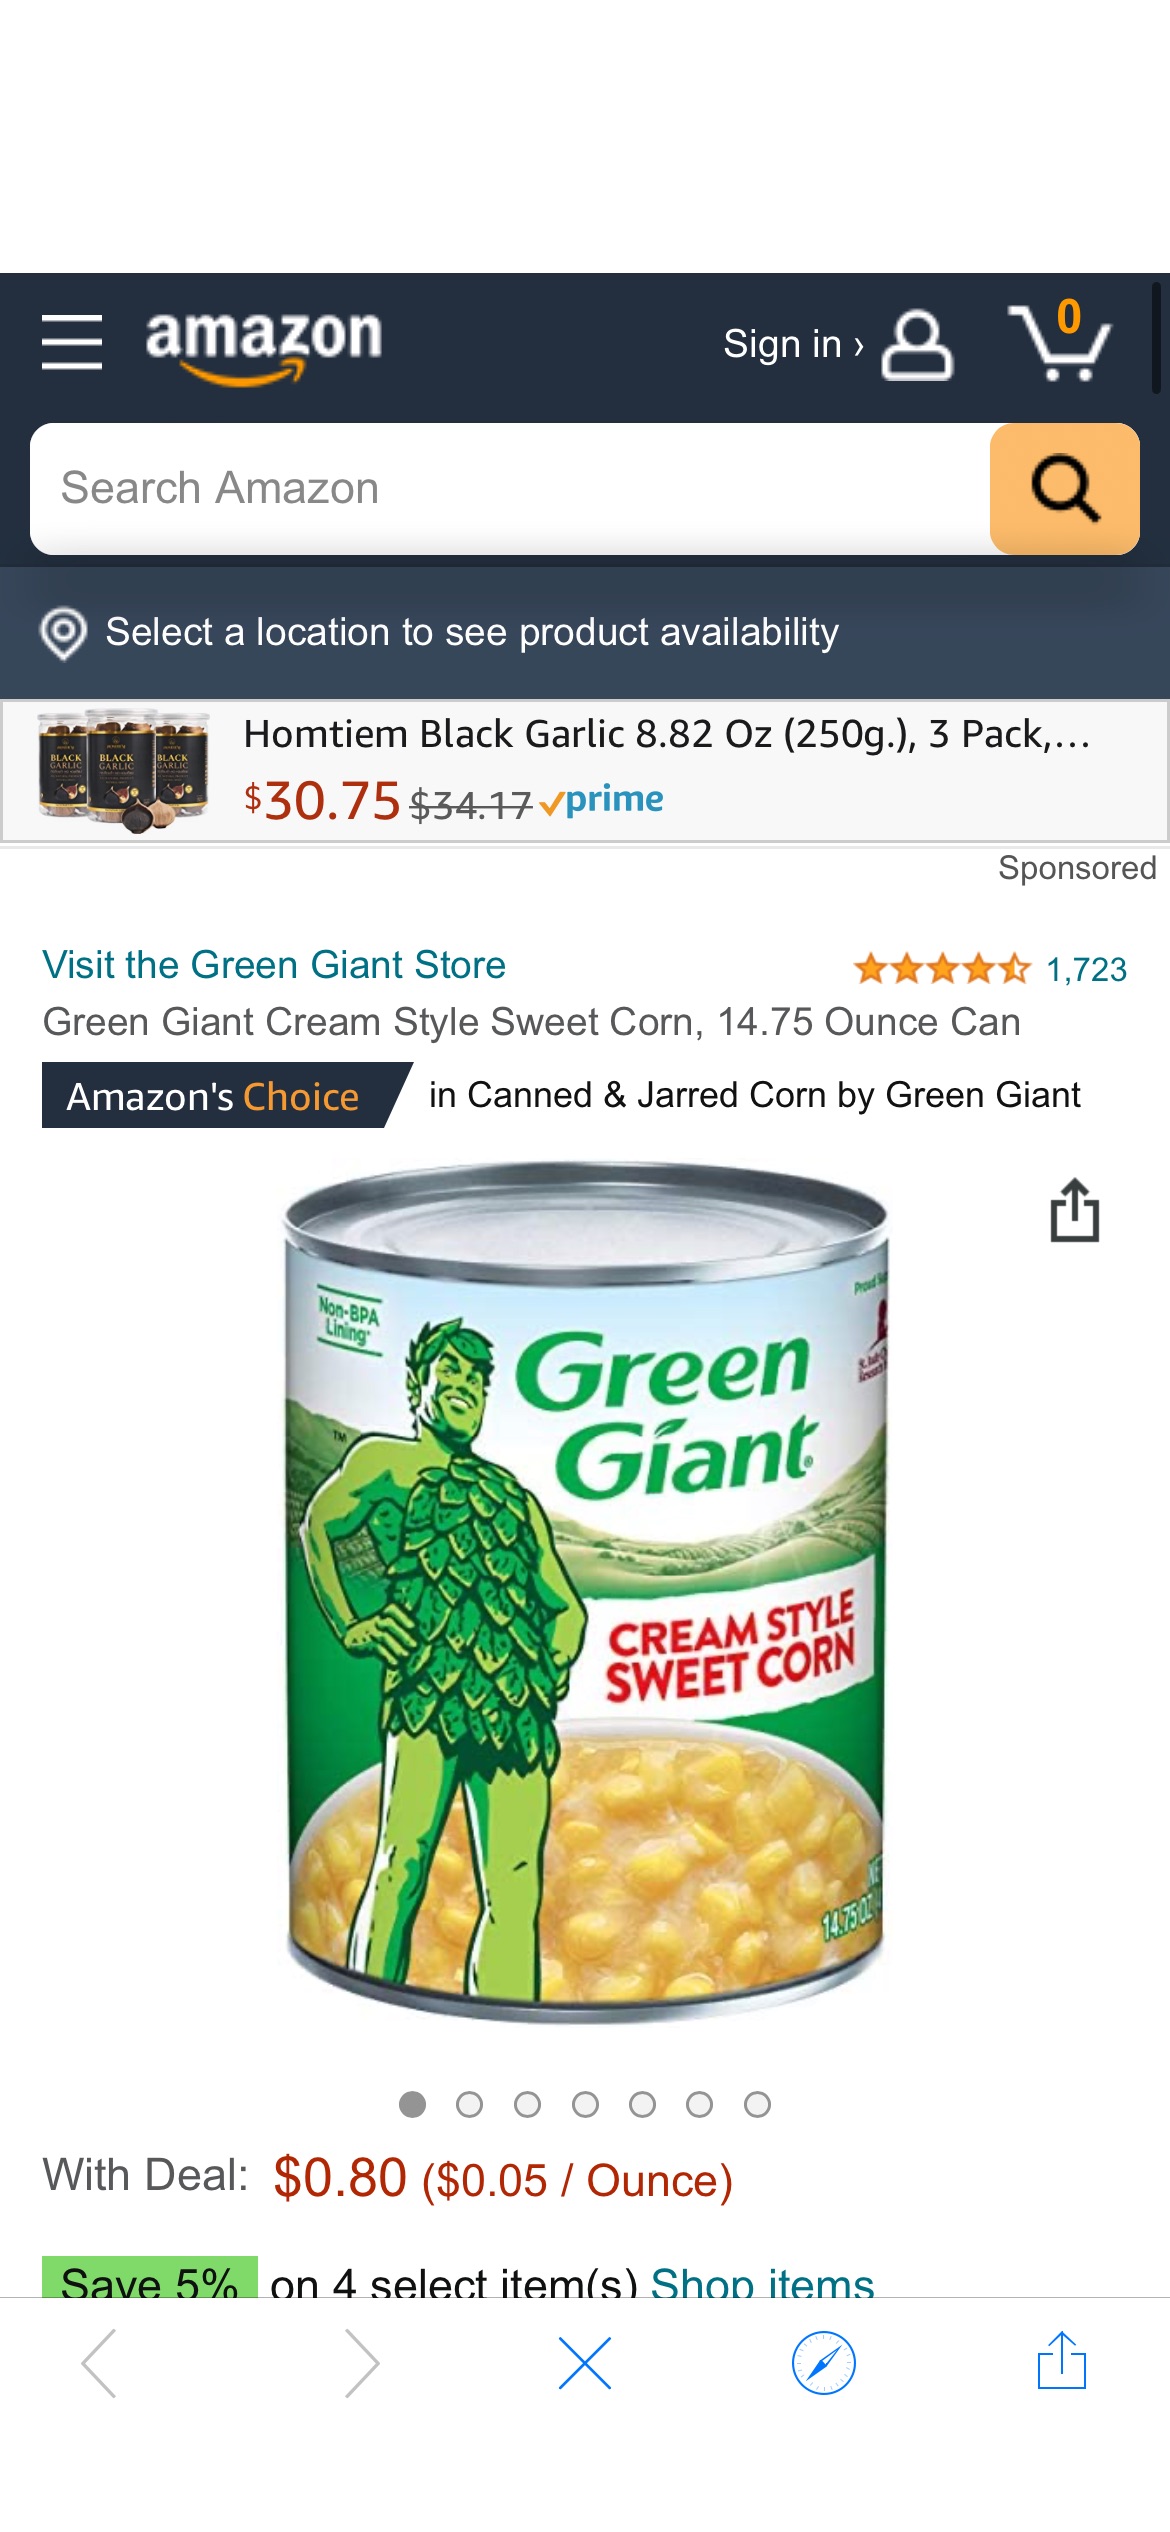 Amazon.com : Green Giant Cream Style Sweet Corn, 14.75 Ounce Can : Grocery & Gourmet Food